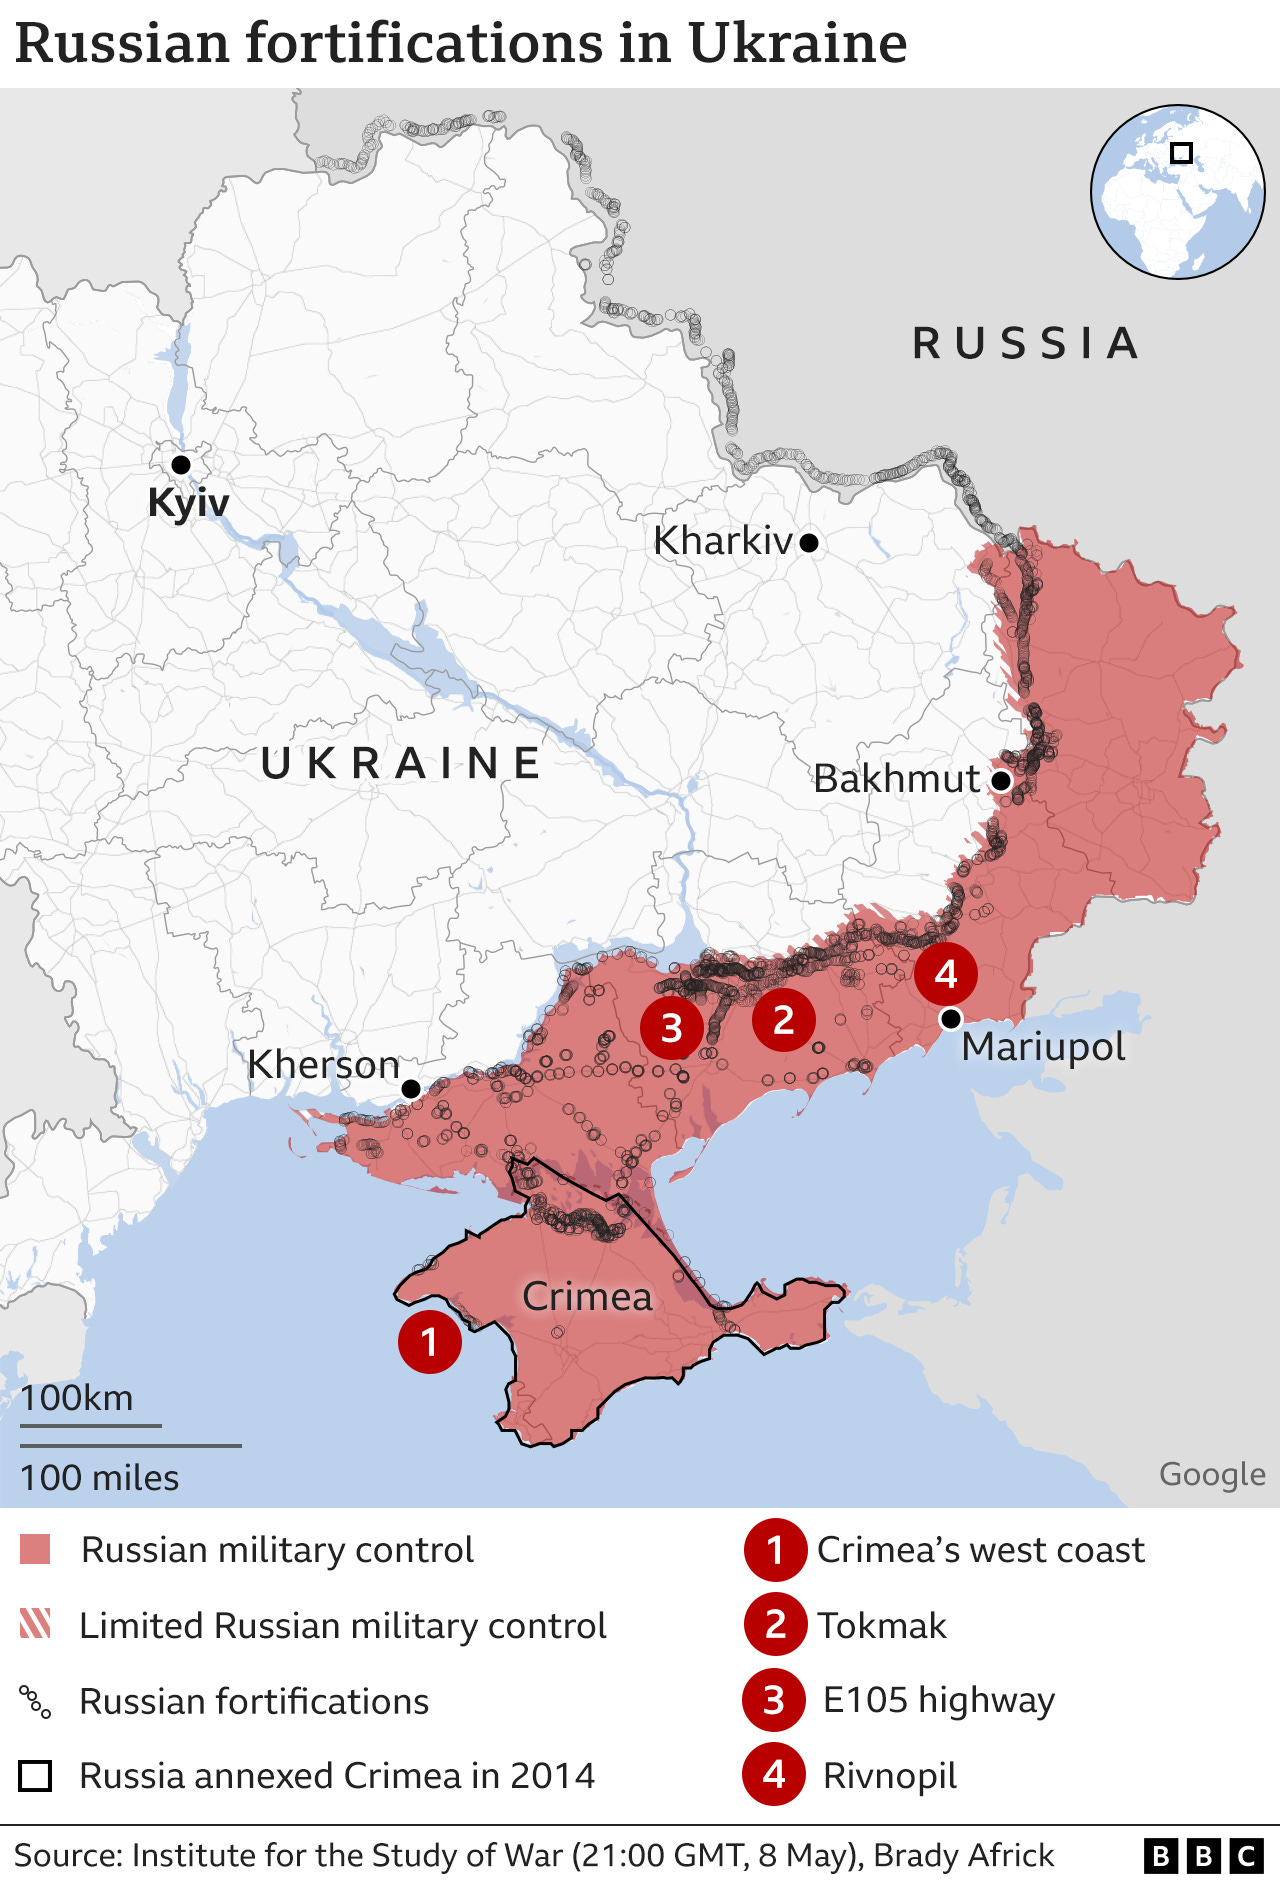 Map showing Russian-controlled areas in Ukraine, with a dense network of trenches marked across the front line and deep into southern Ukraine.